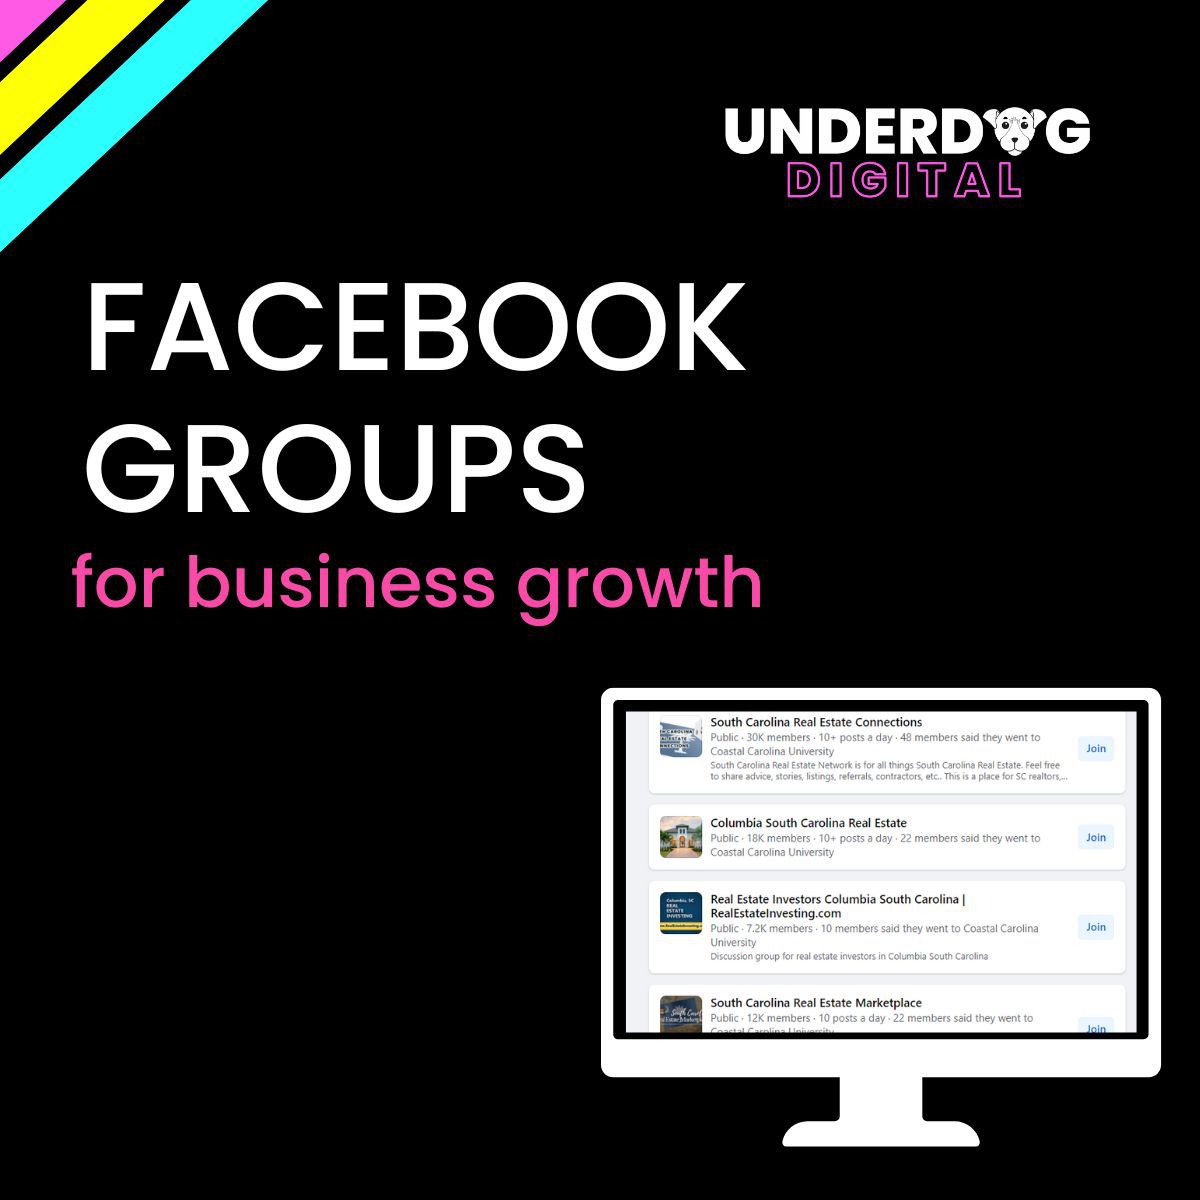 How to Get High ROI from Facebook Groups for Small Businesses | Underdog Digital